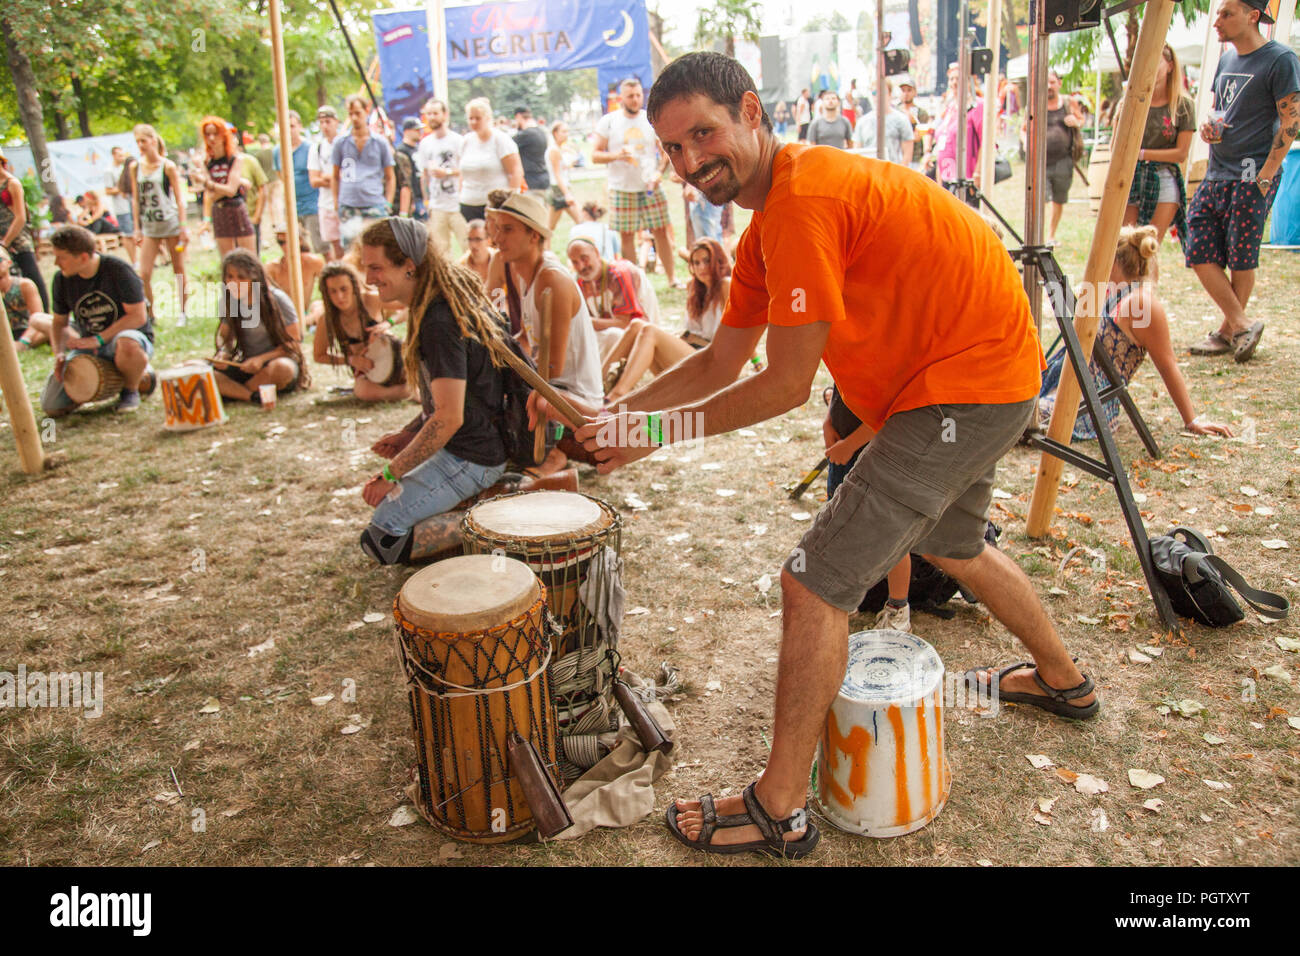 Bratislava, Slovakia. 24th August, 2018. Visitors to the Uprising Music Festival drum and enjoy their time. Stock Photo